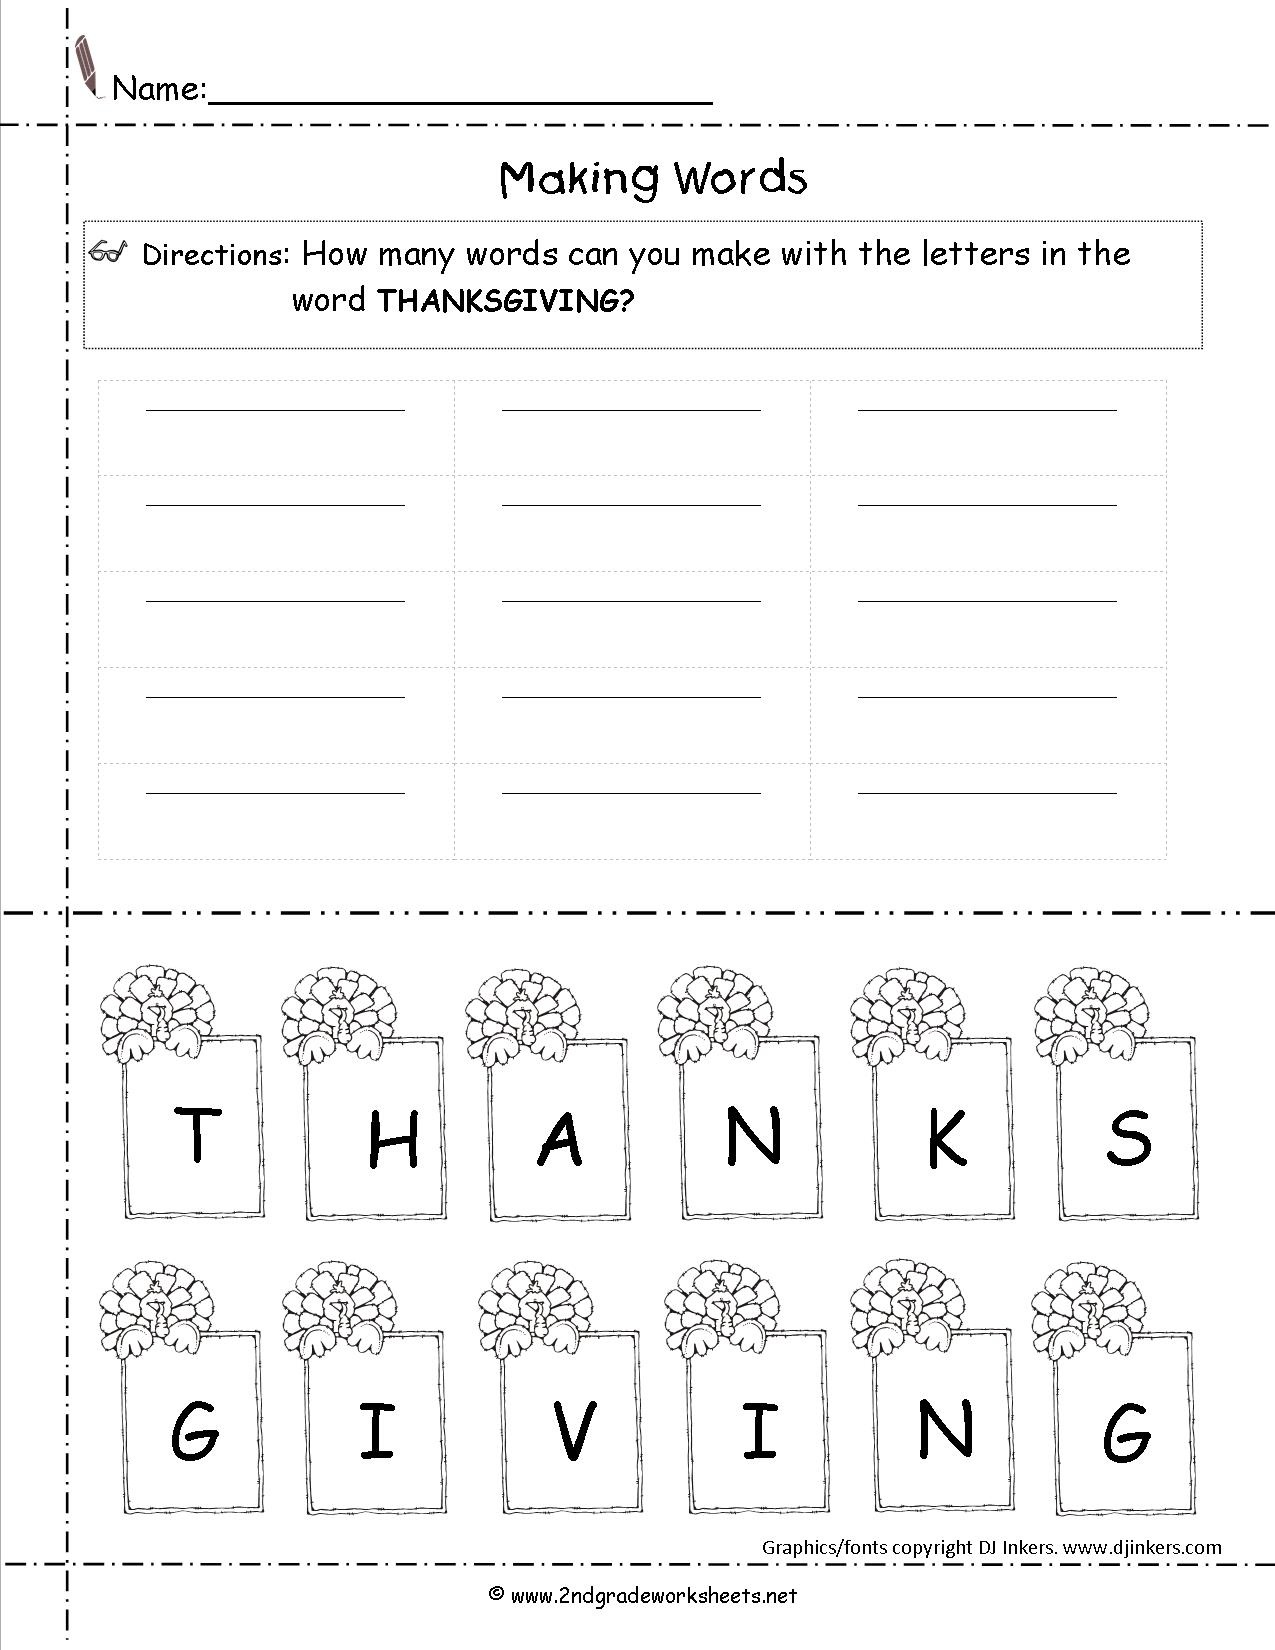 Thanksgiving Printouts From The Teacher&amp;#039;s Guide - Free Printable Thanksgiving Writing Paper